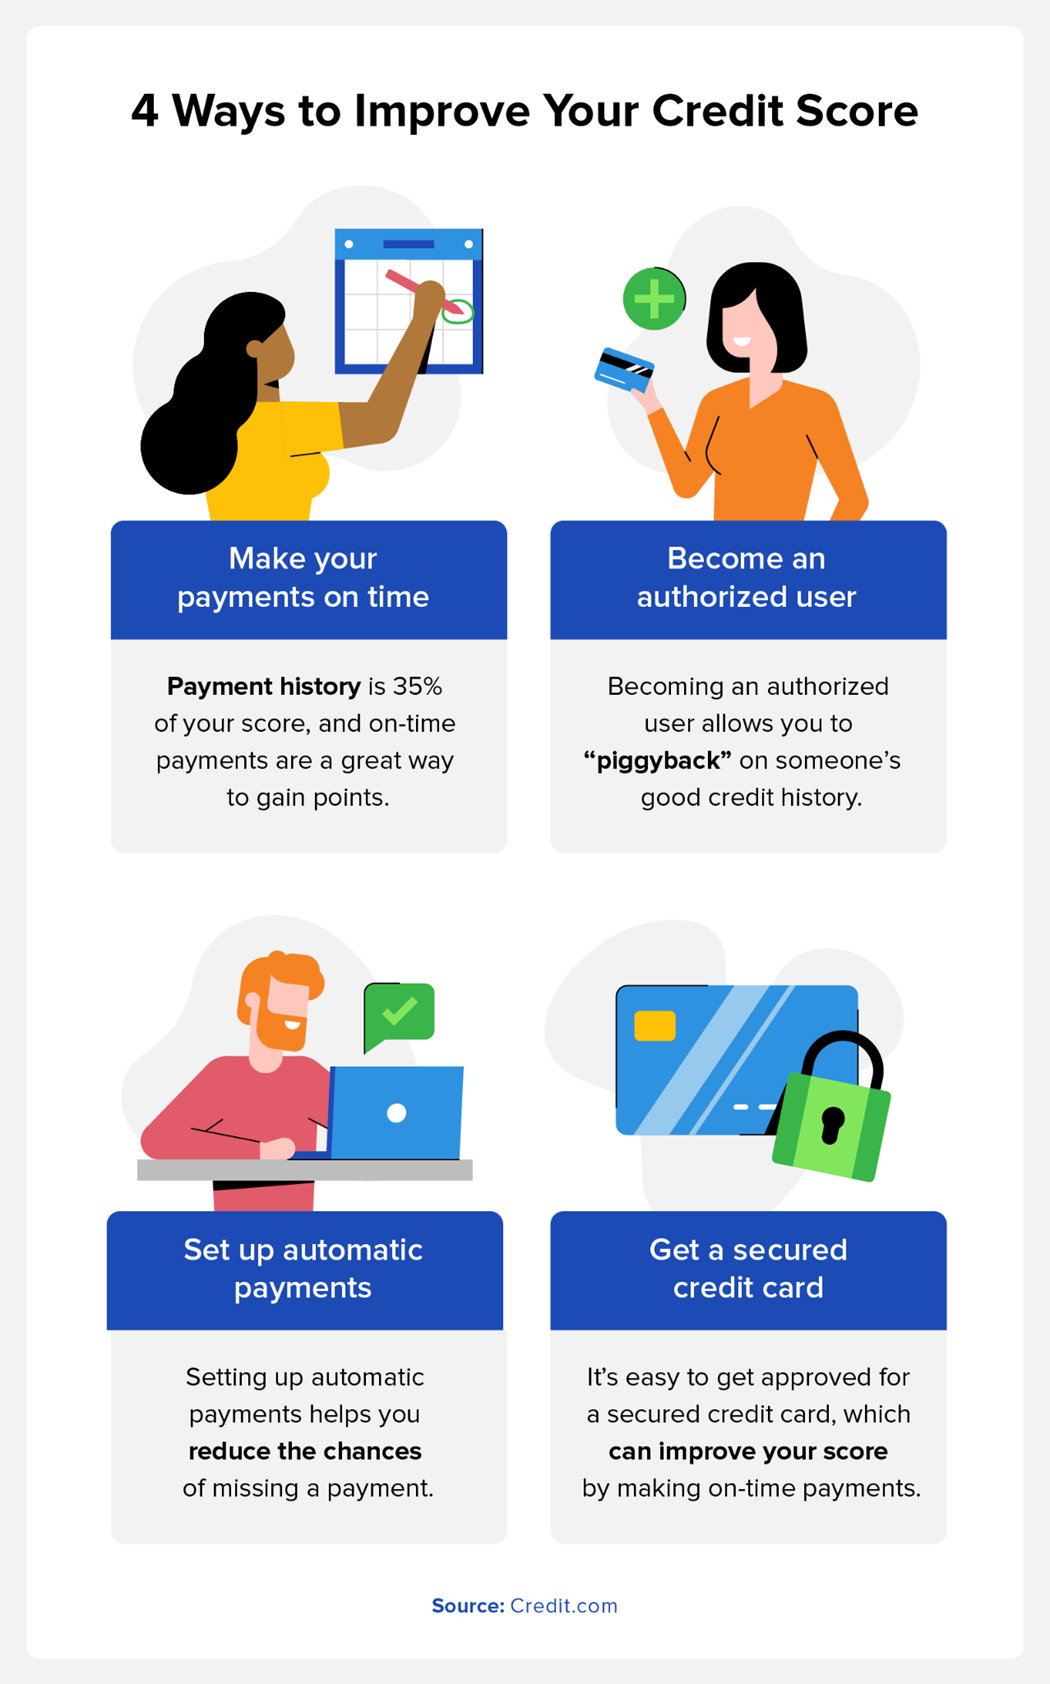 4 ways to improve your credit score